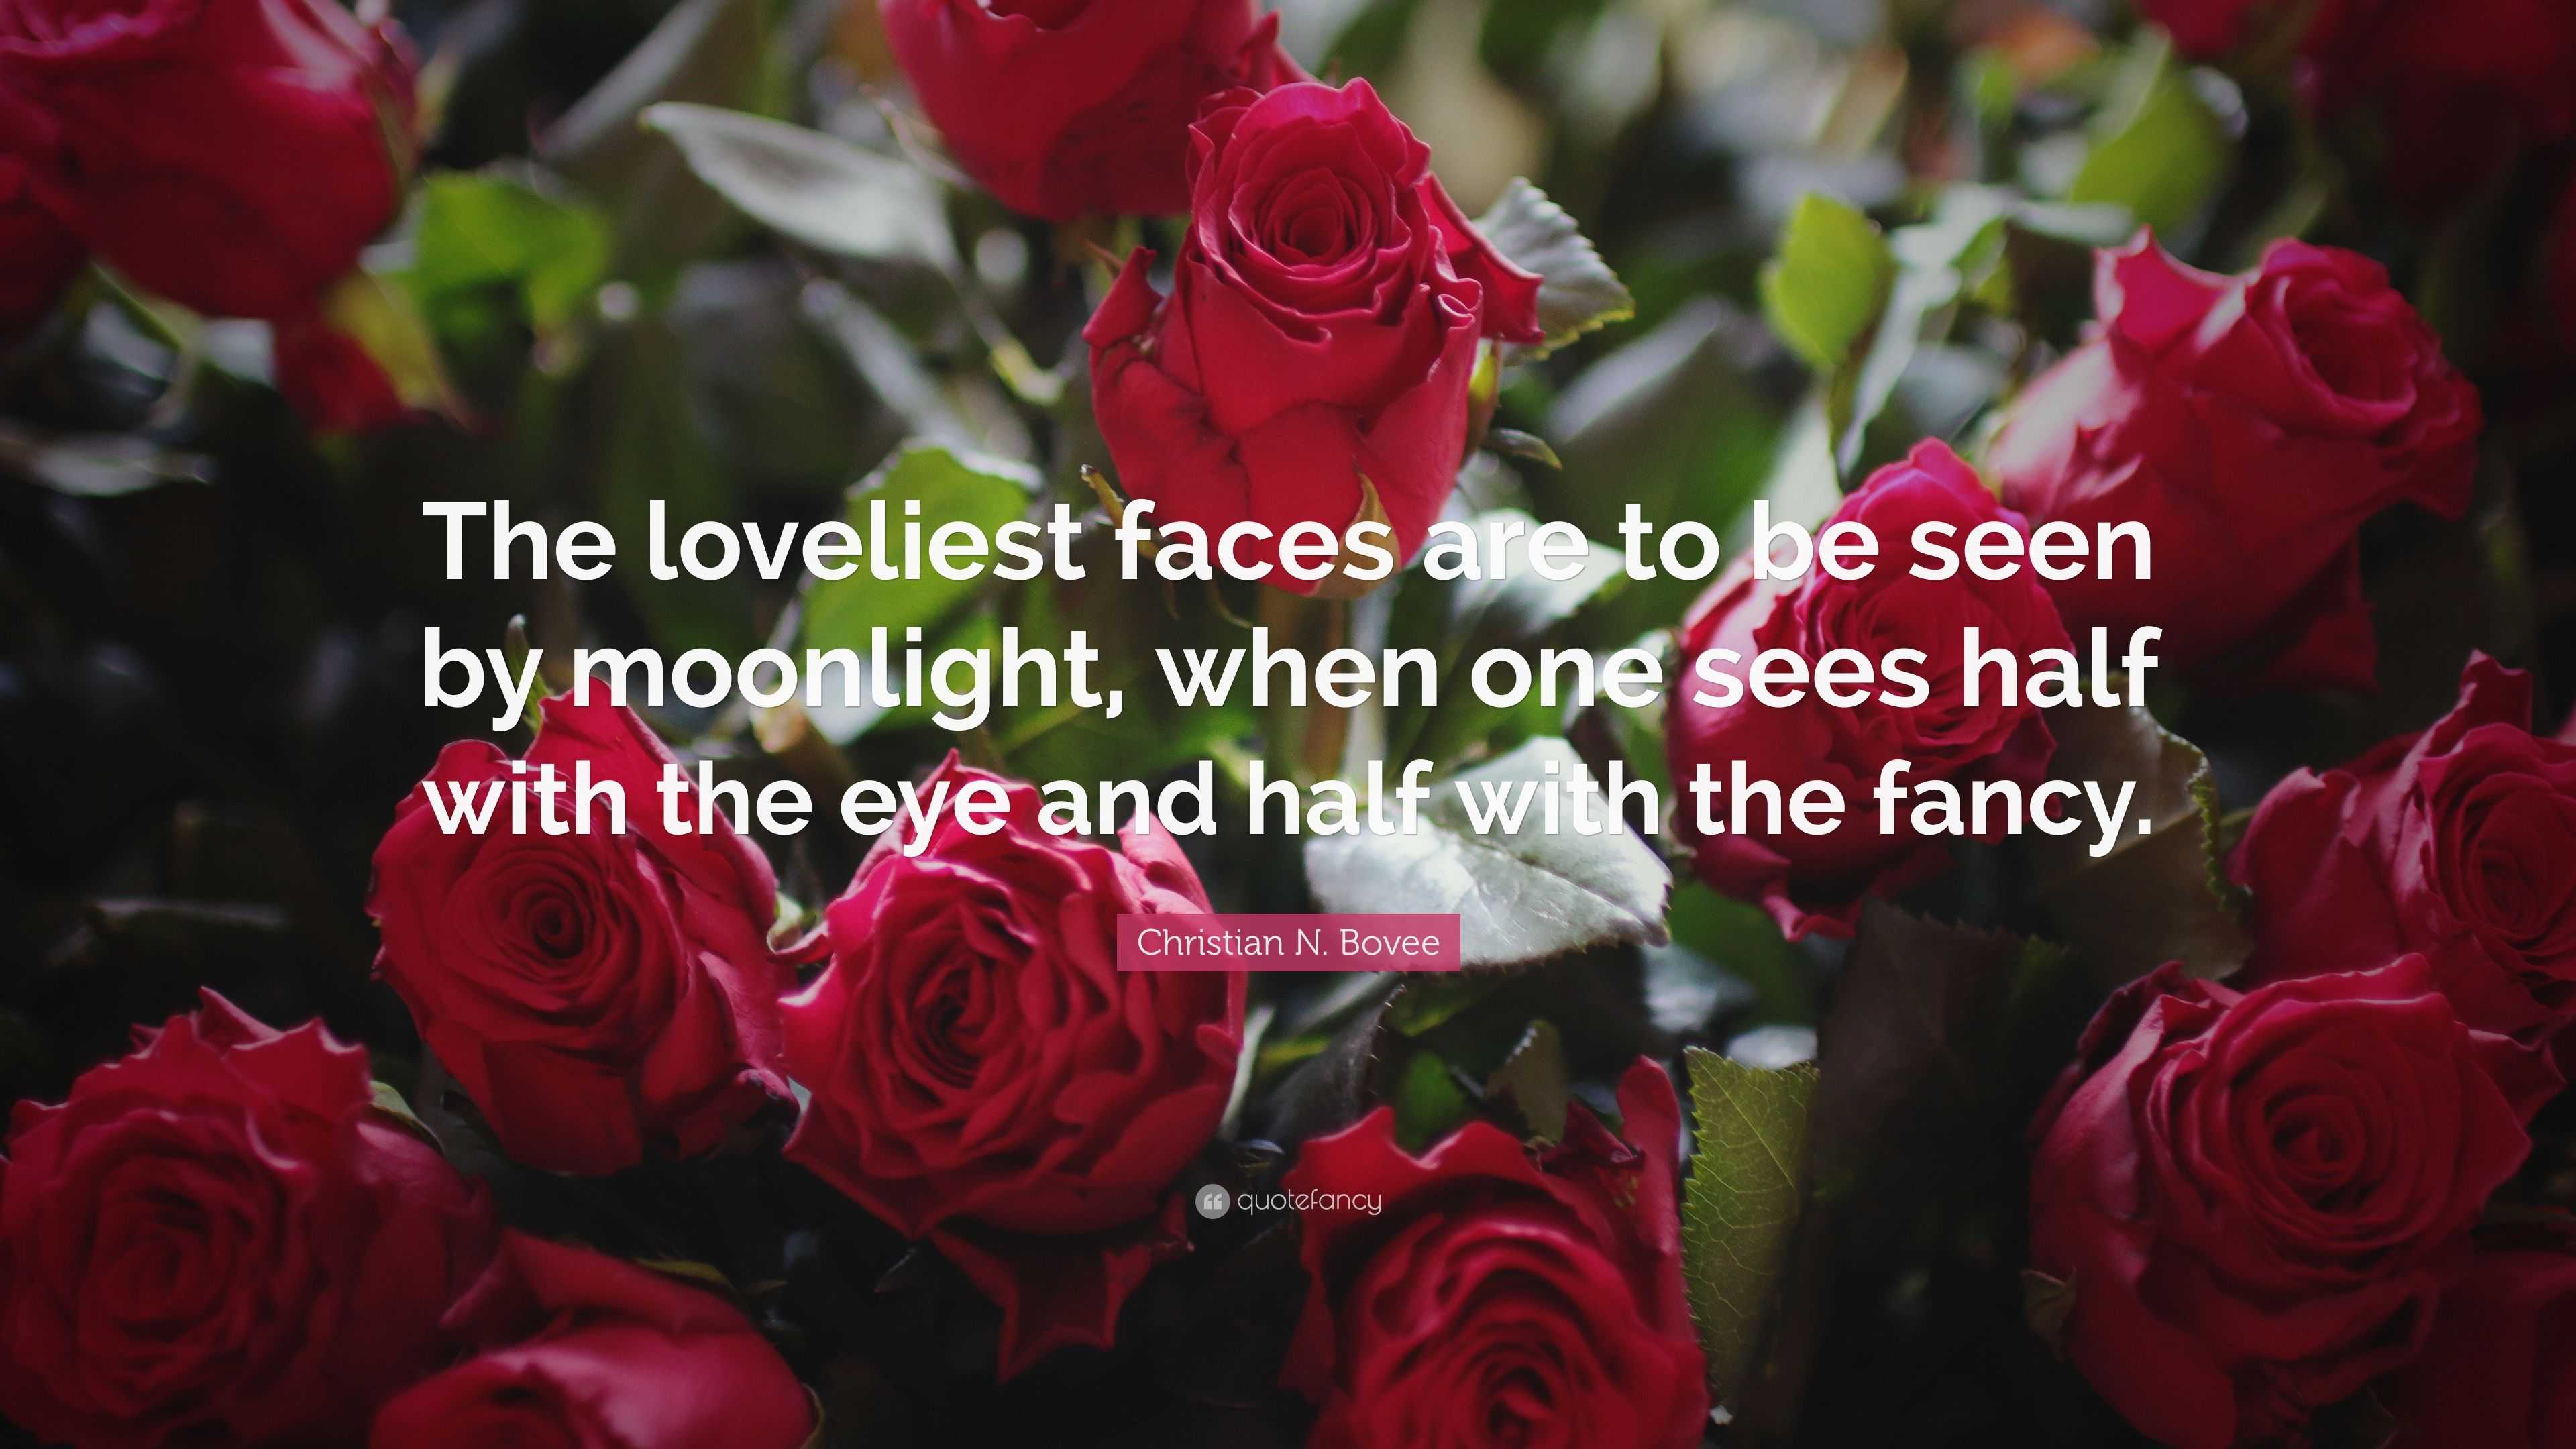 Christian N. Bovee Quote: “The loveliest faces are to be seen by ...